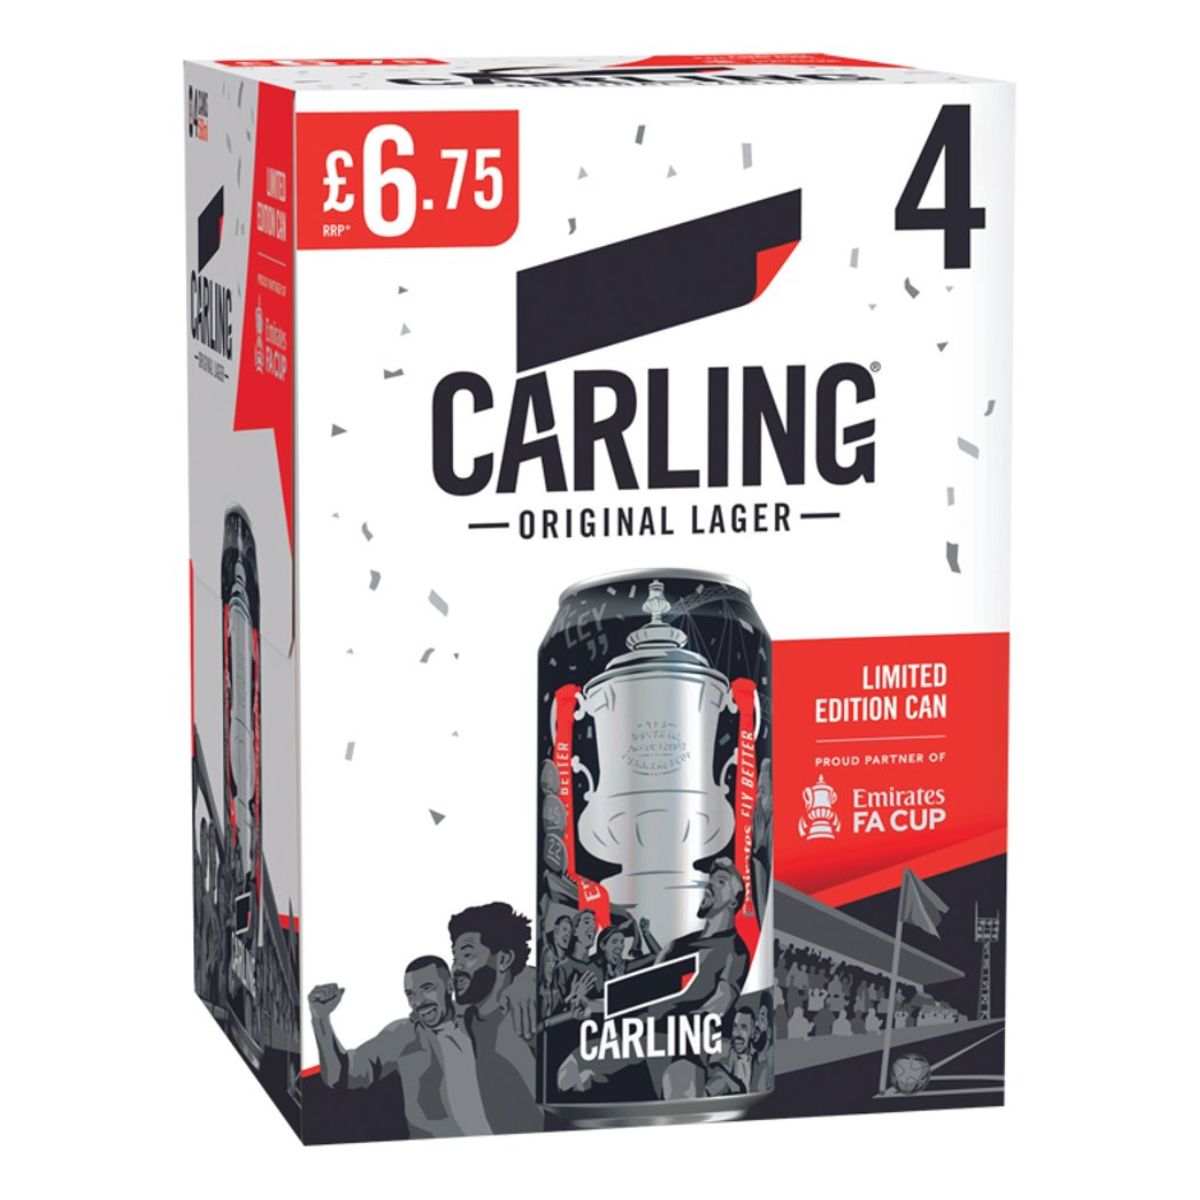 A box of Carling - Original Lager (4% ABV) - 4 x 568ml beer.